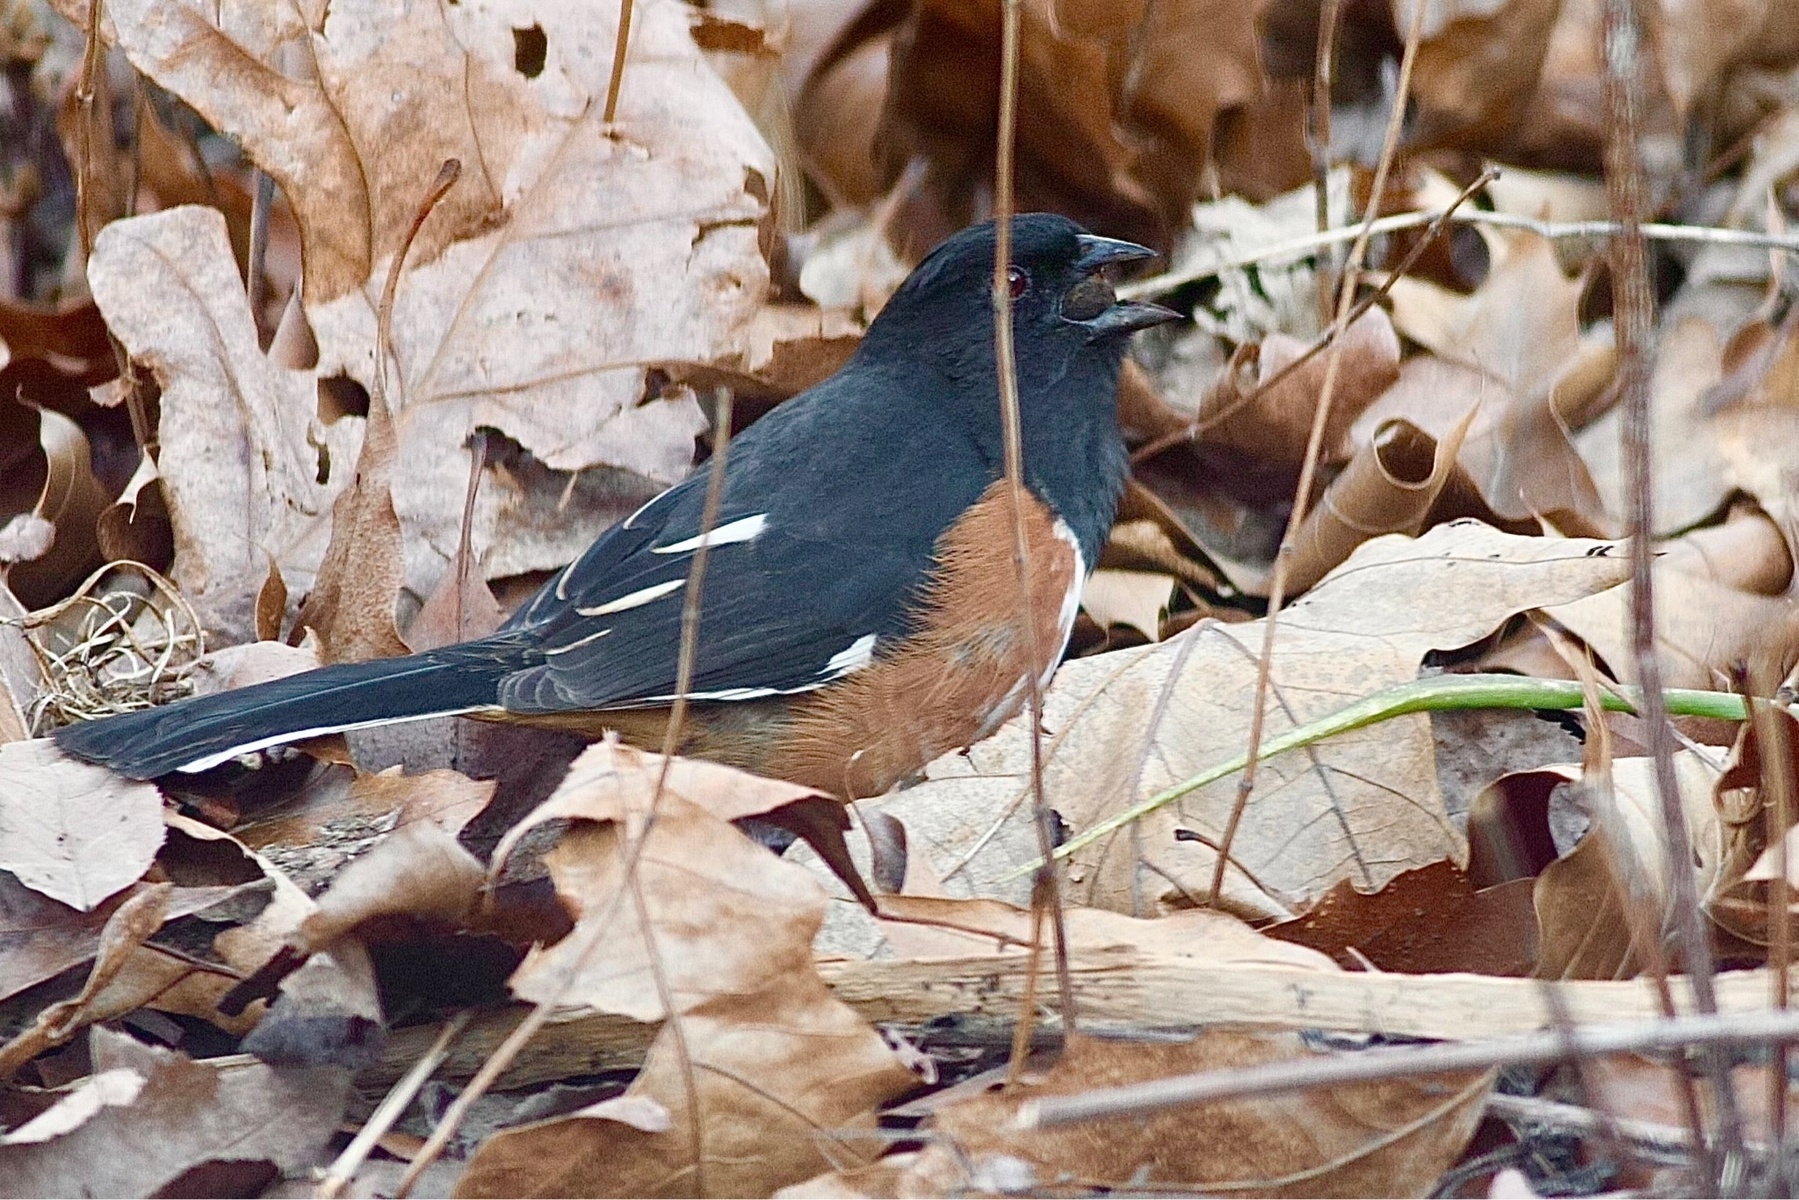 A bird with a black backside and  orangeish brown front side is foraging amongst winter leaves on the ground. Upon closer inspection, it can be seen that the bird is in the process of swallowing a spider.